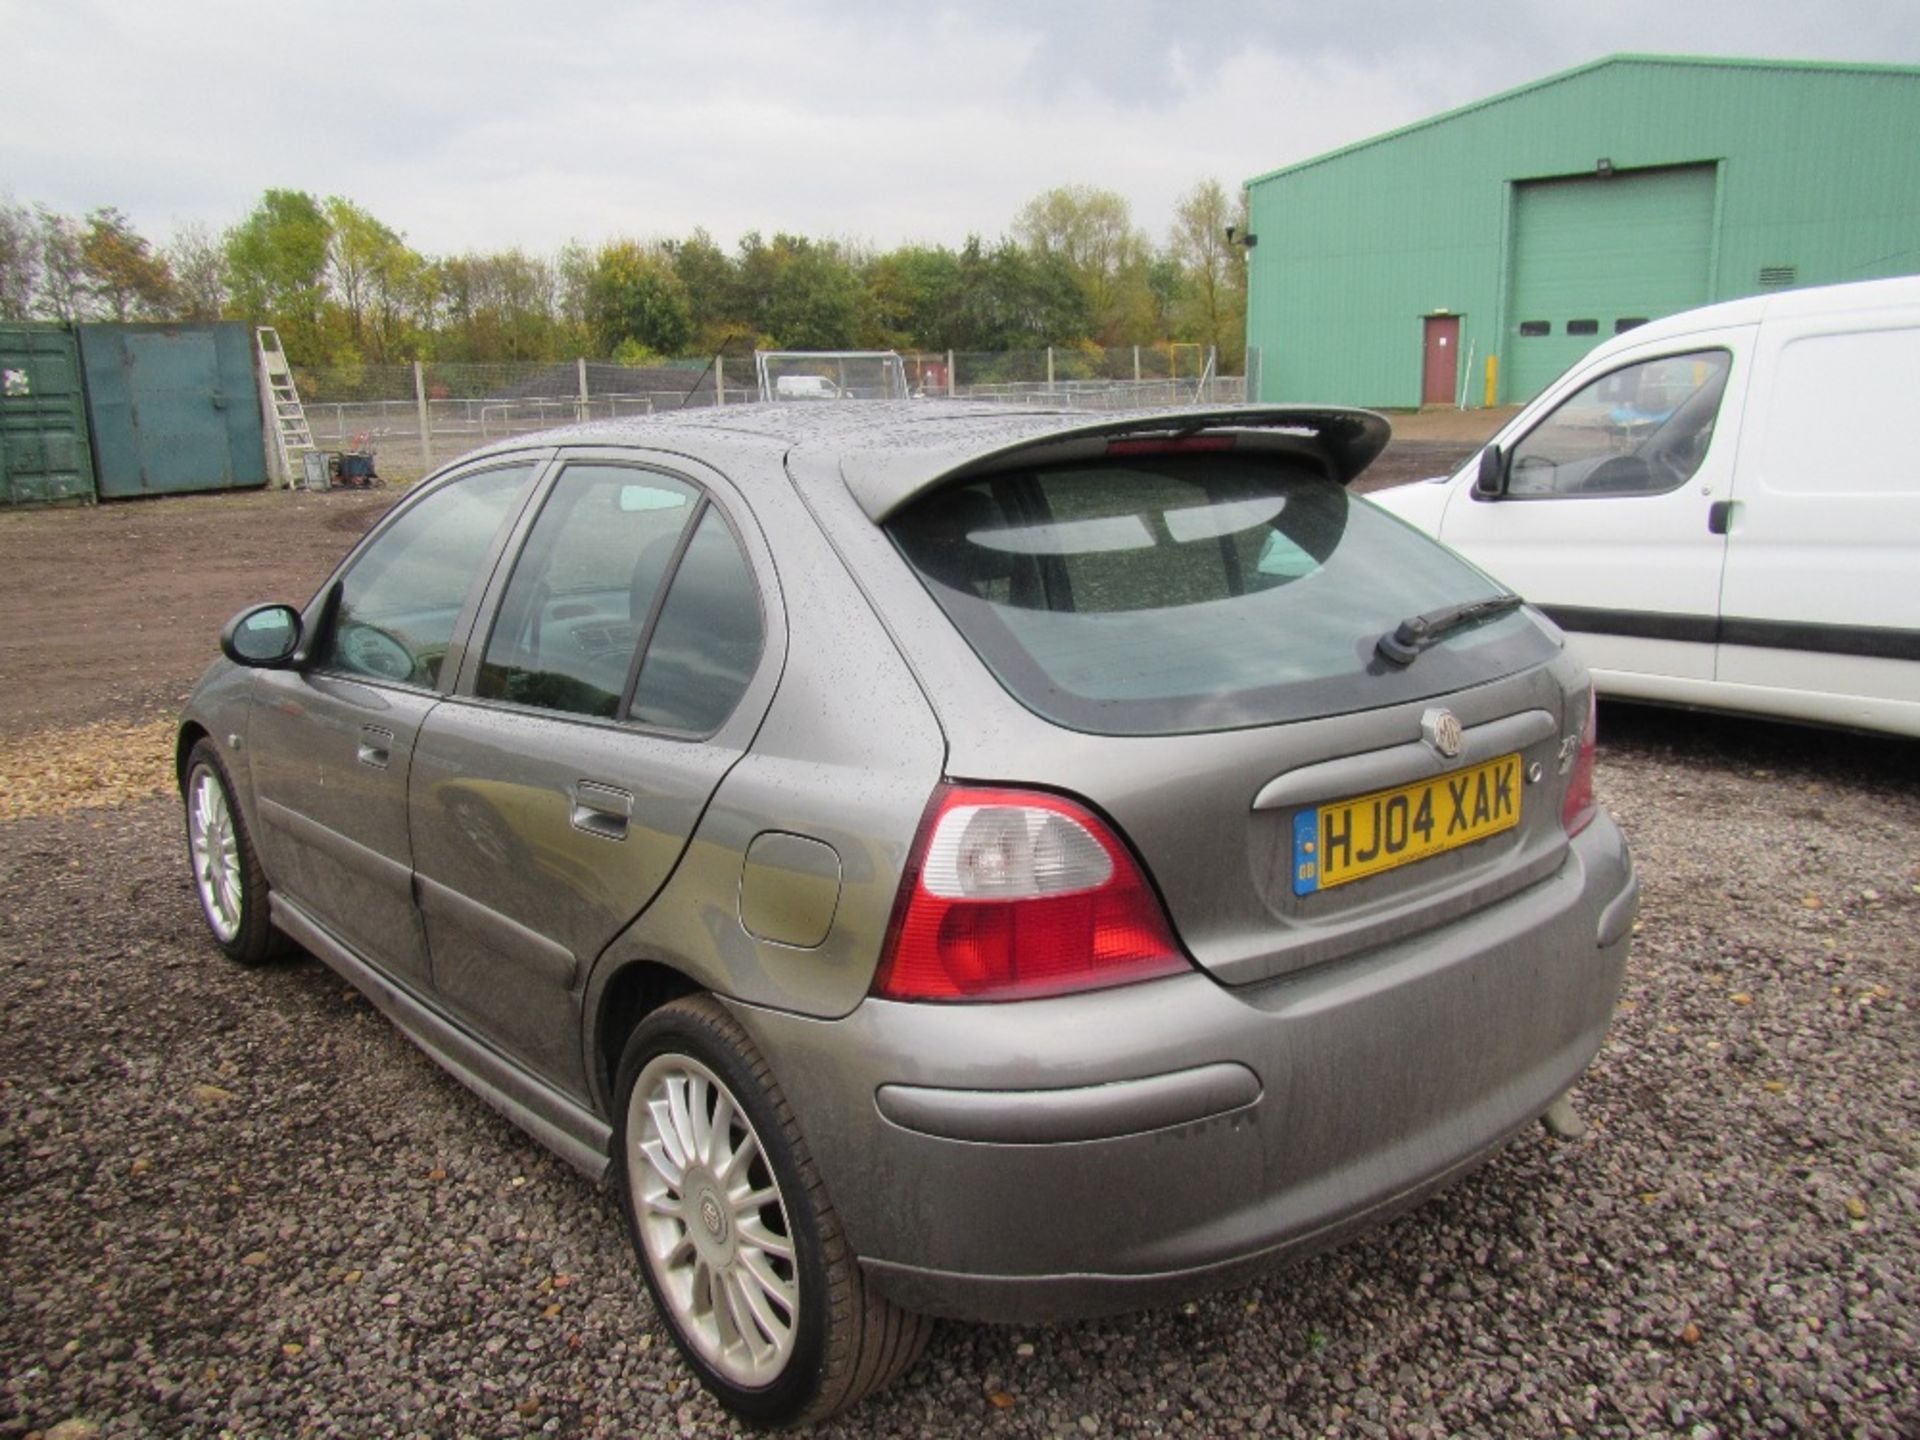 MG ZR 2.0 TD 115 Diesel Manual with Sunroof, Air Con, Half Leather Trim & 17inch Alloy Wheels. 3 - Image 5 of 5